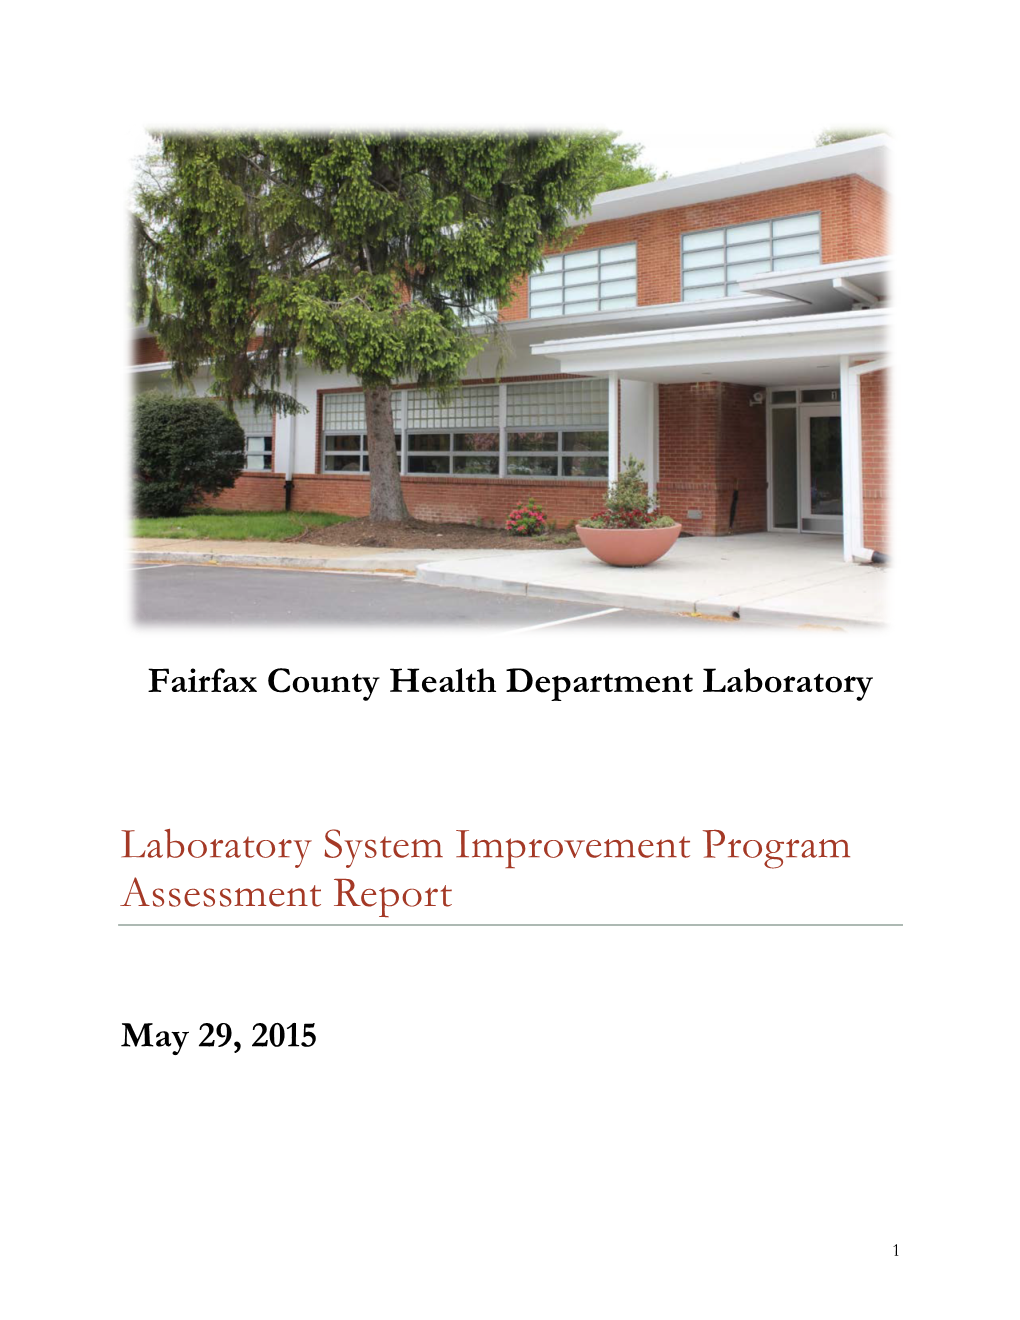 Fairfax County Public Health Laboratory System Assessment